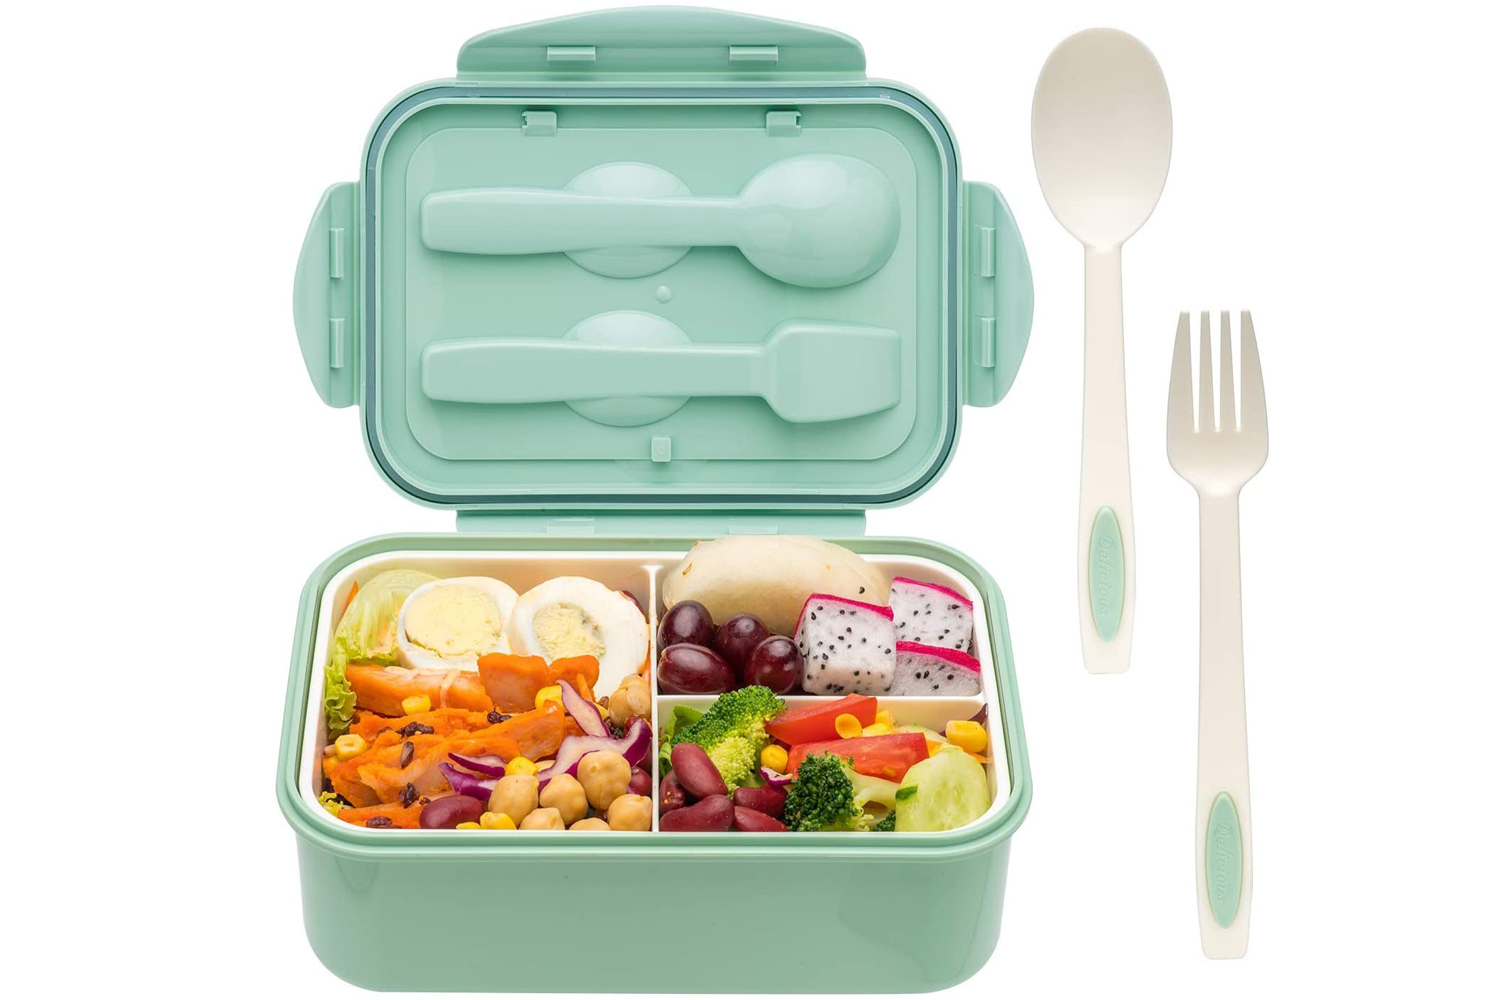 Greater Good. Stainless Steel Lunch Box with 3 Compartments - 1400 ml